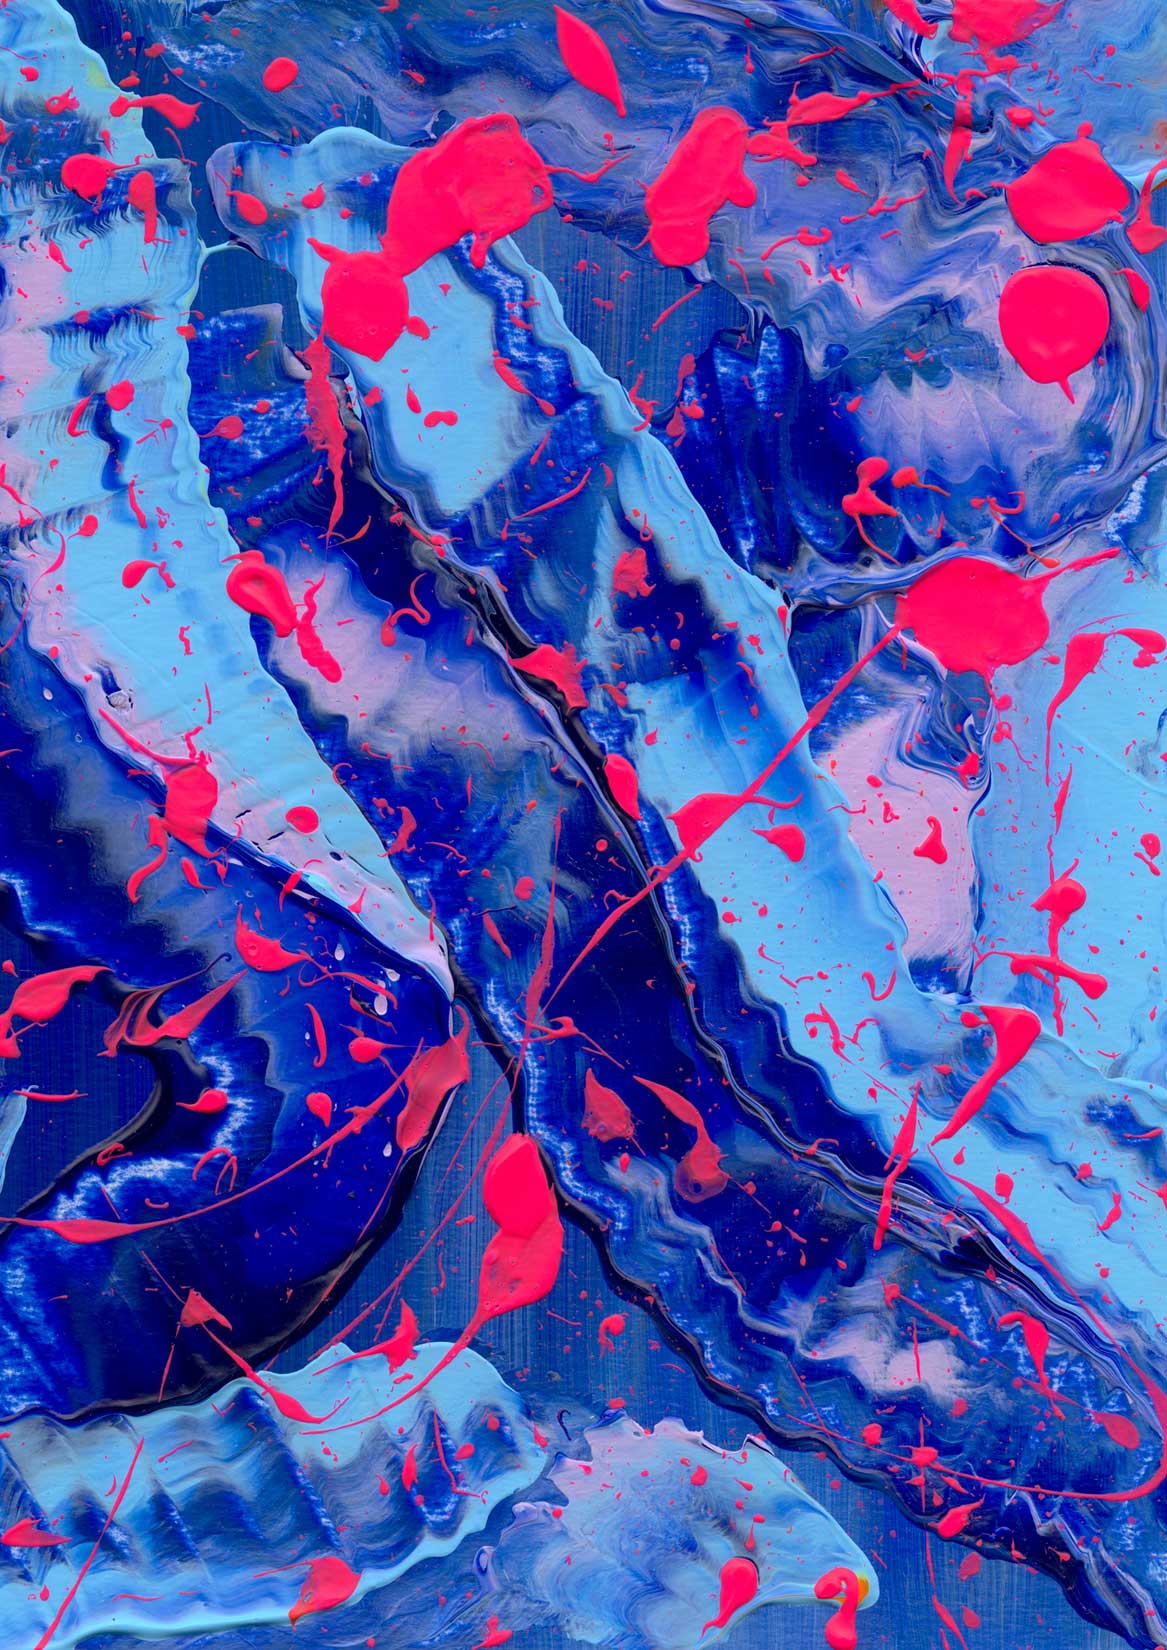 Blue III Abstract print on Canvas Unframed. Vibrant blues and neon pinks make this a stand out abstract for wall art. Bridget Bradley Abstract Artist